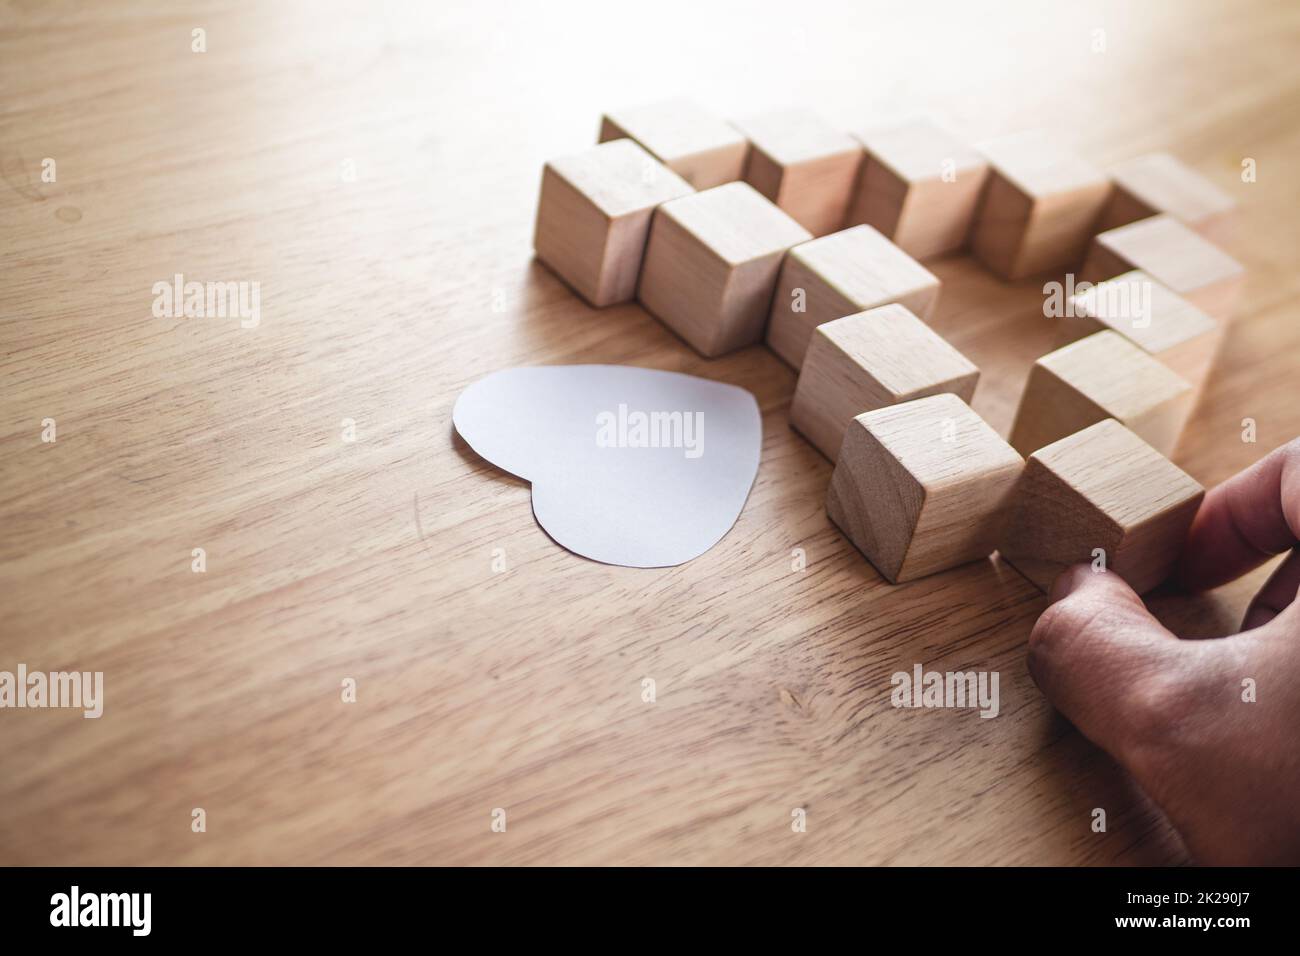 Love connection concept. Someone assembles wood blocks to  be heart shape. Stock Photo